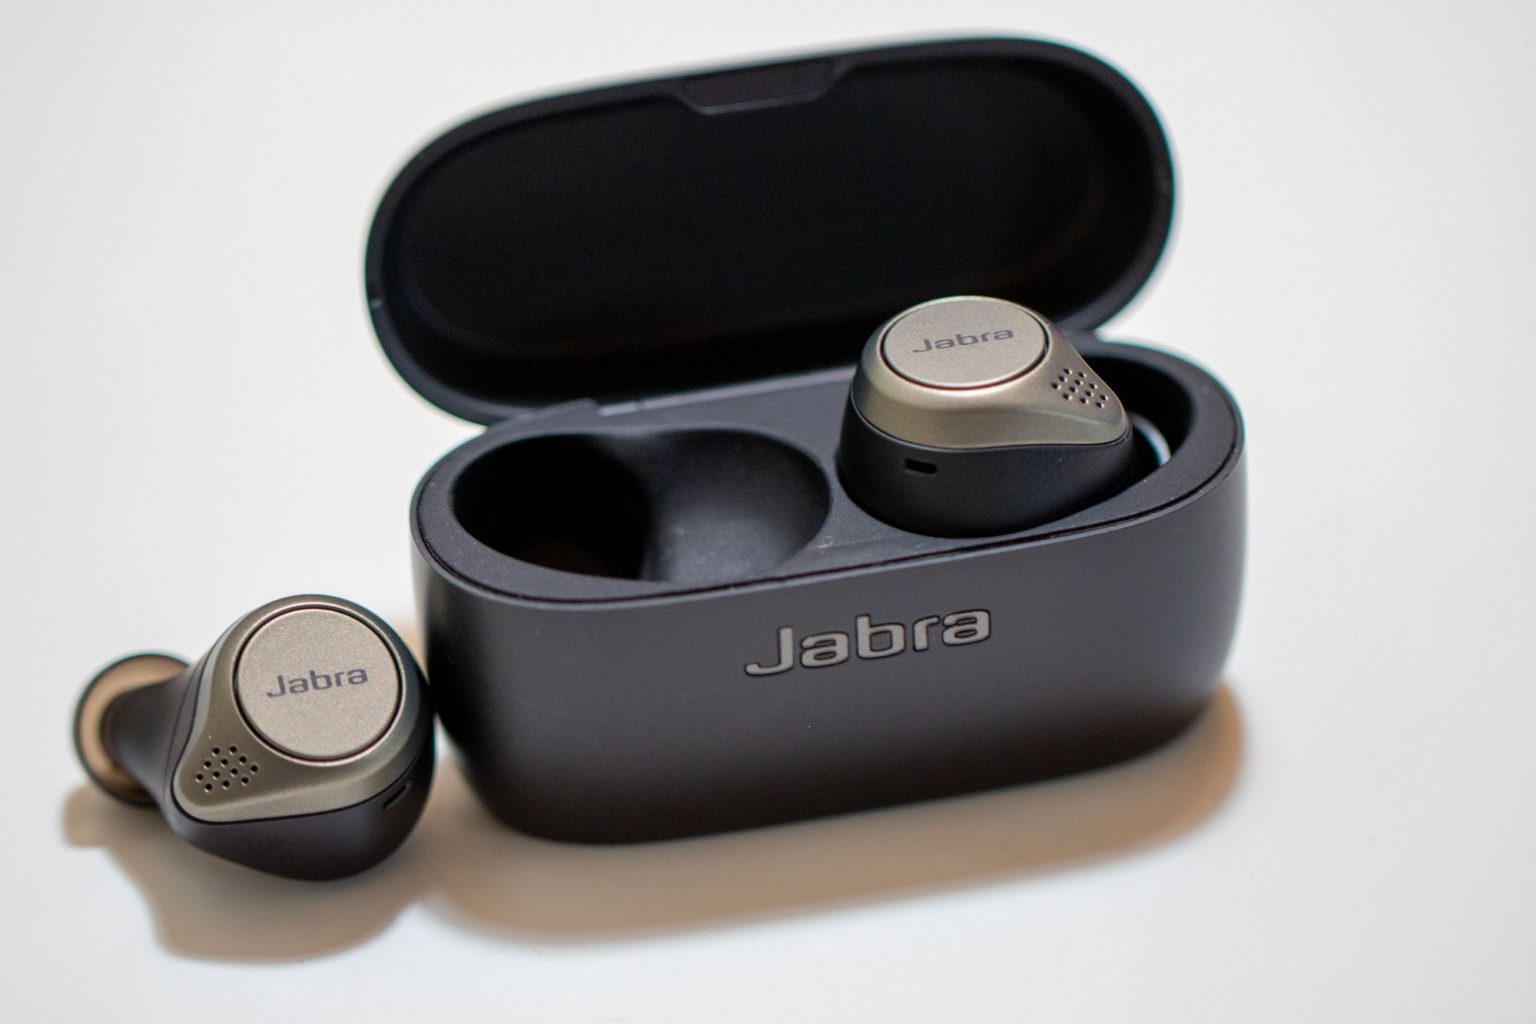 Jabra Elite 75t Review: Almost perfect - Phandroid